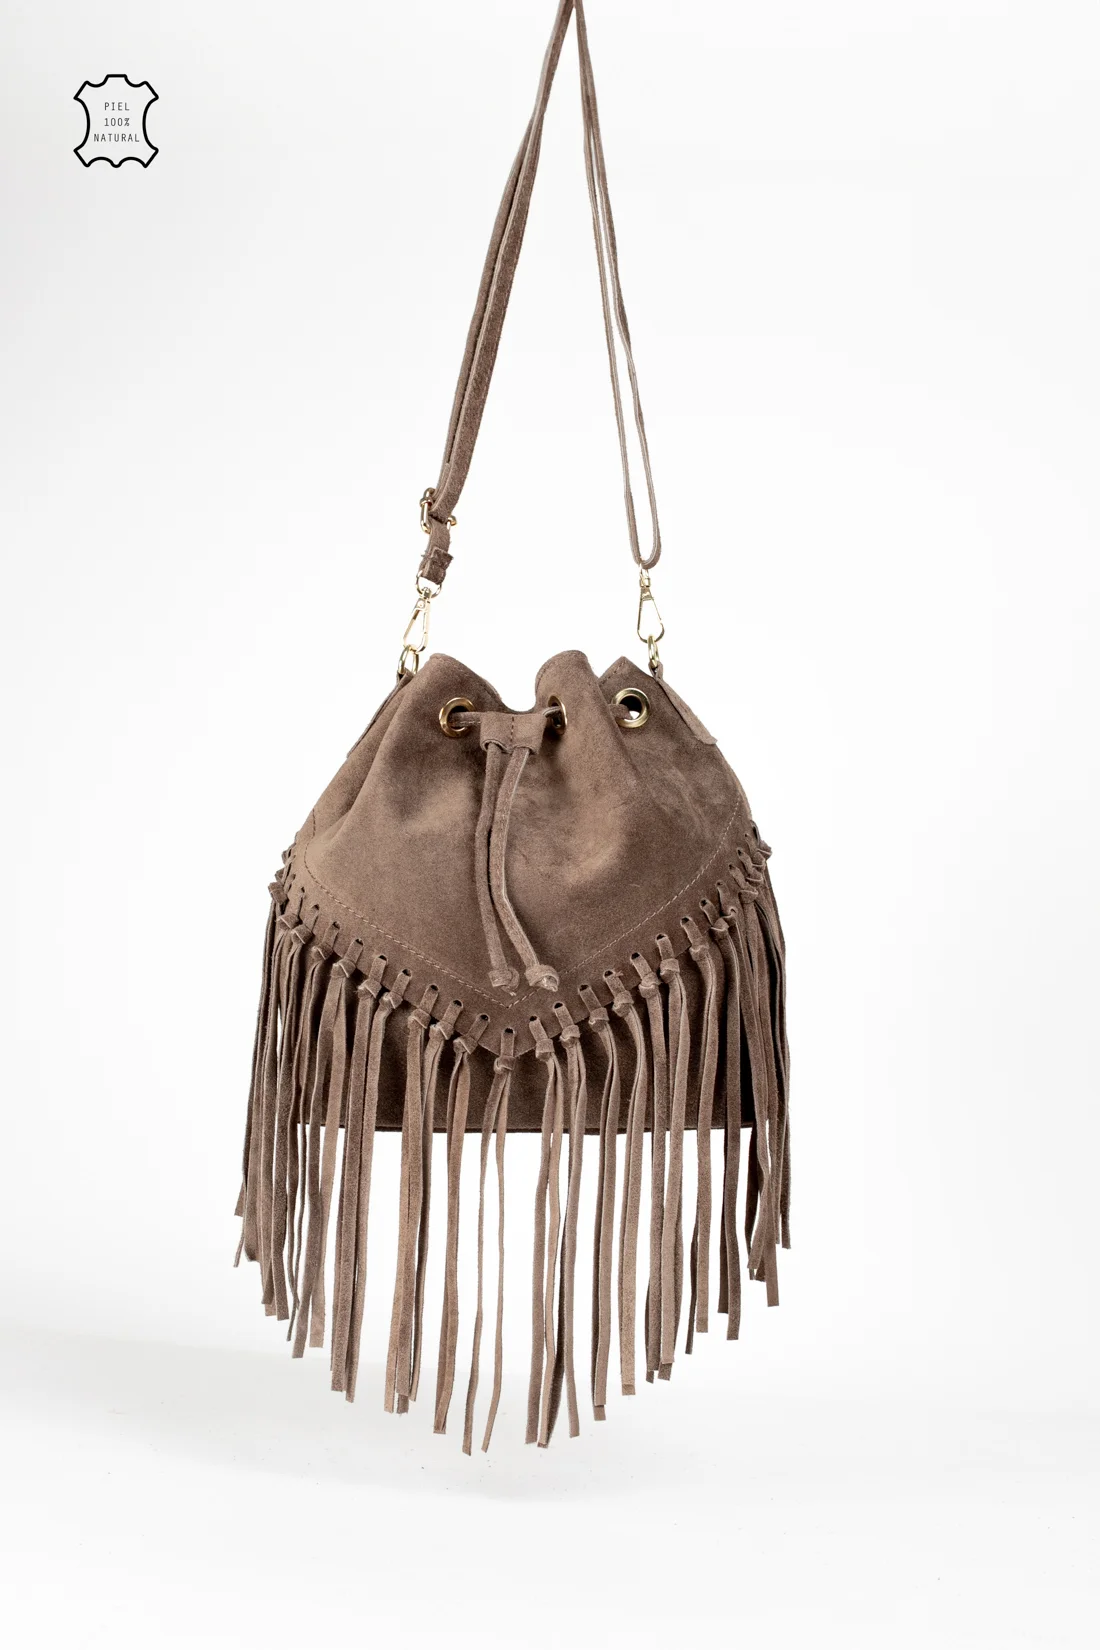 MAUMERE LEATHER BAG - DARK TAUPE